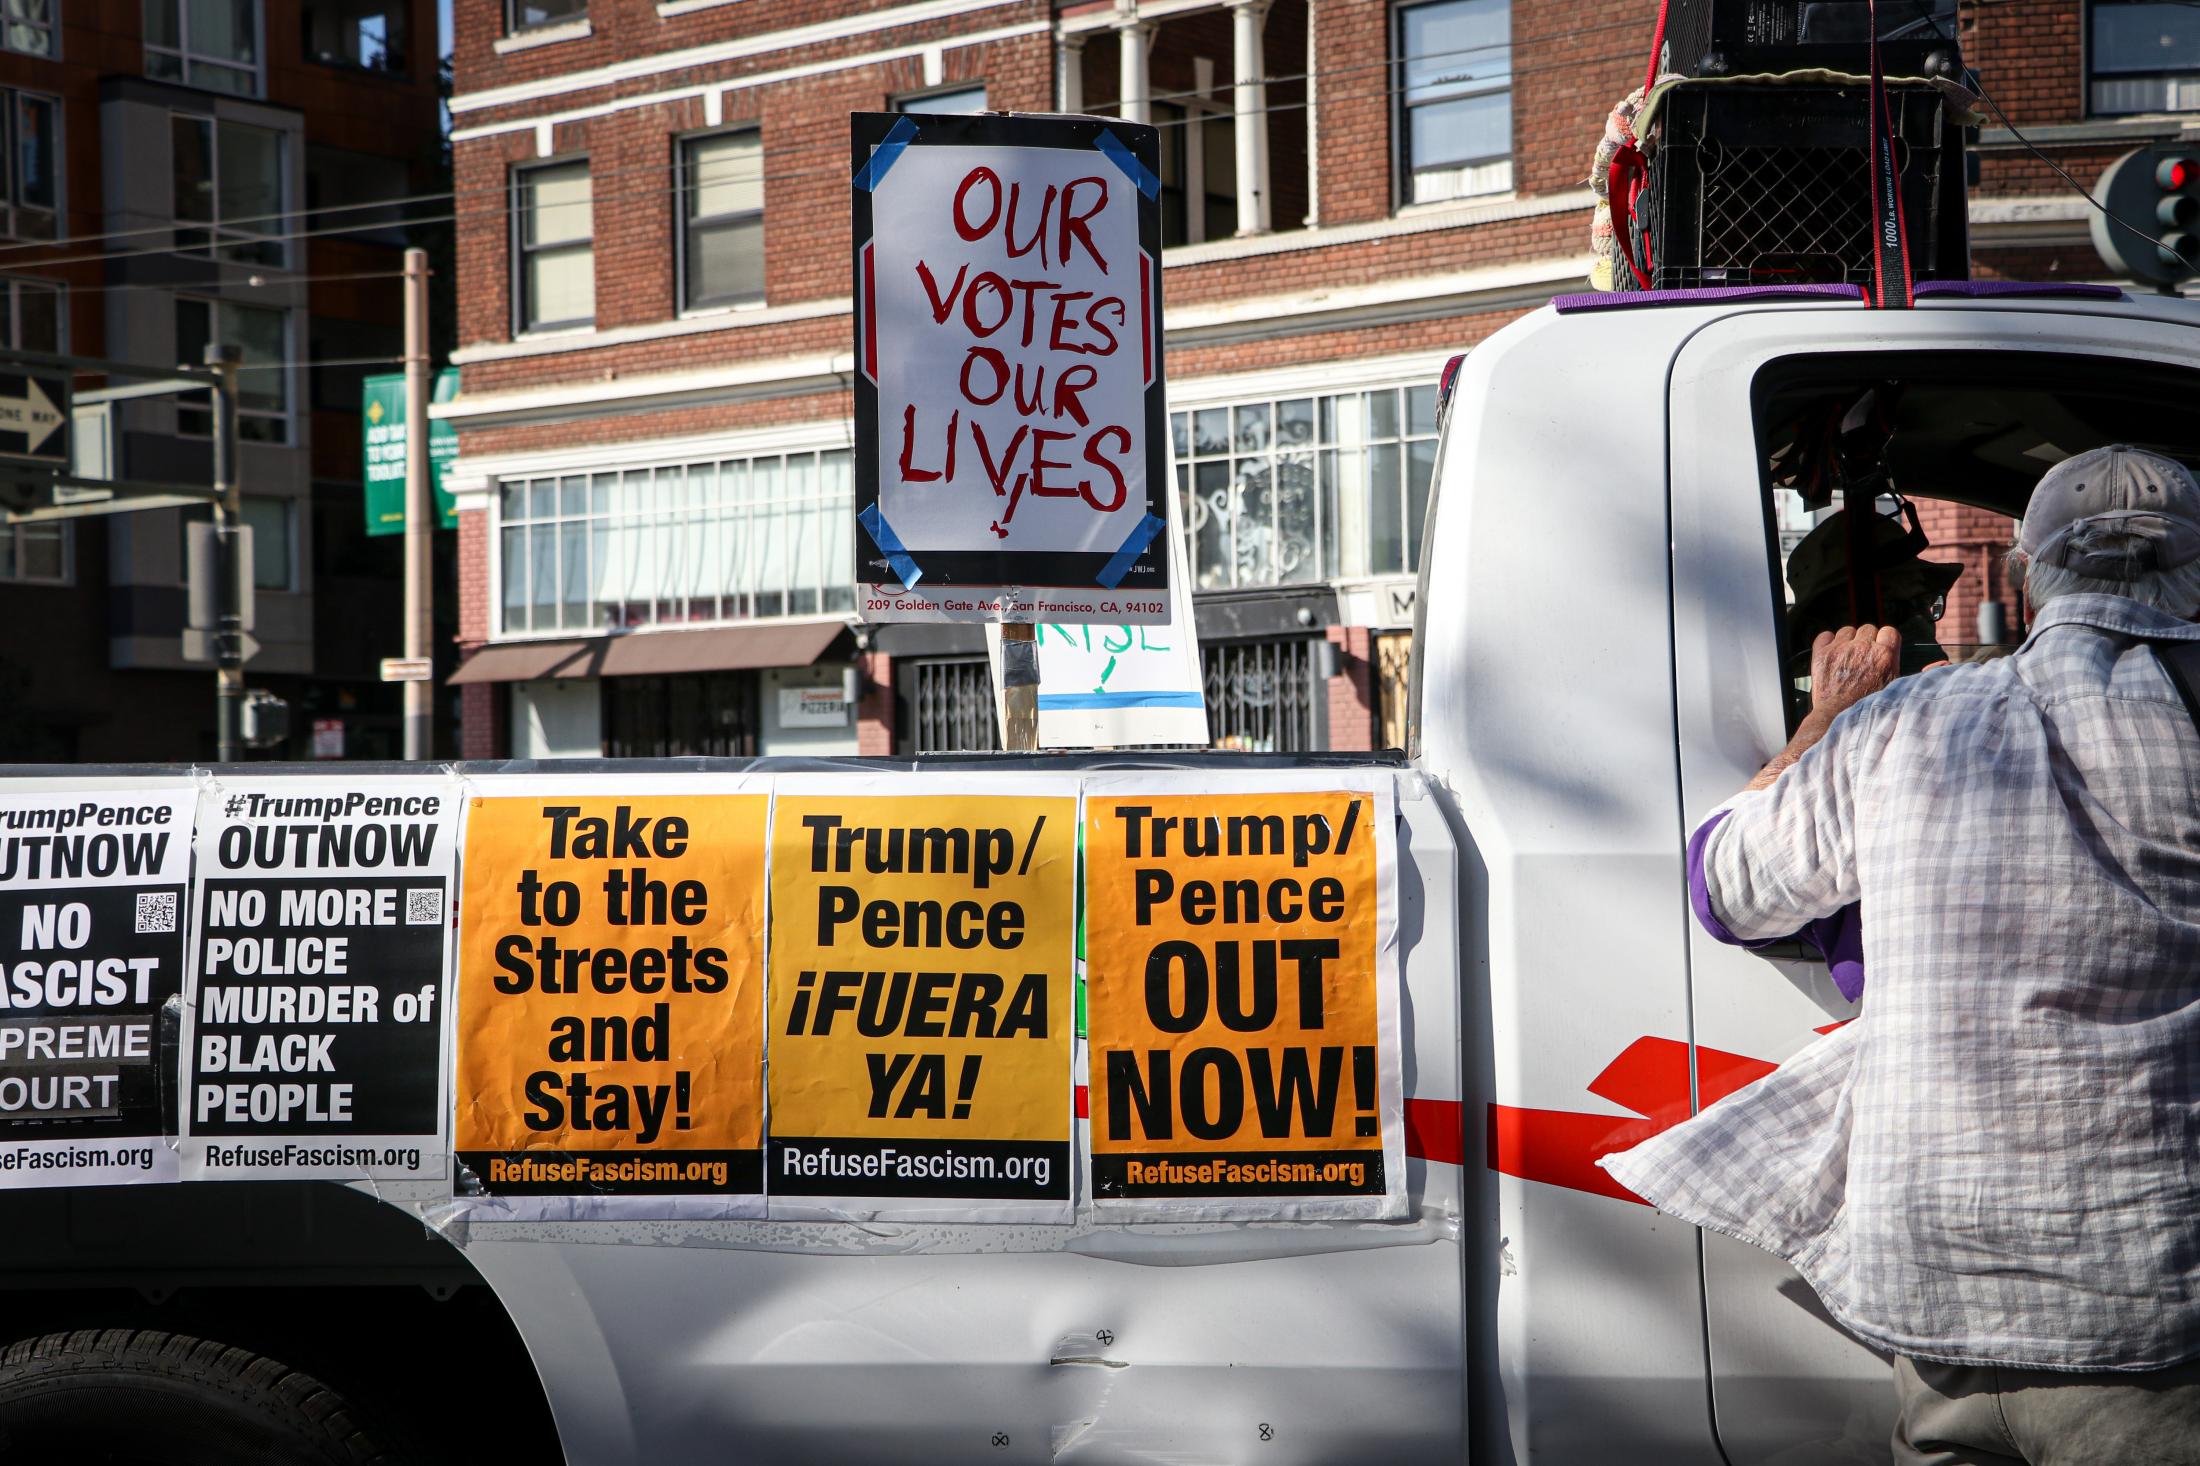 Democracy March SF - A truck carrying supplies such as water bottles for the...